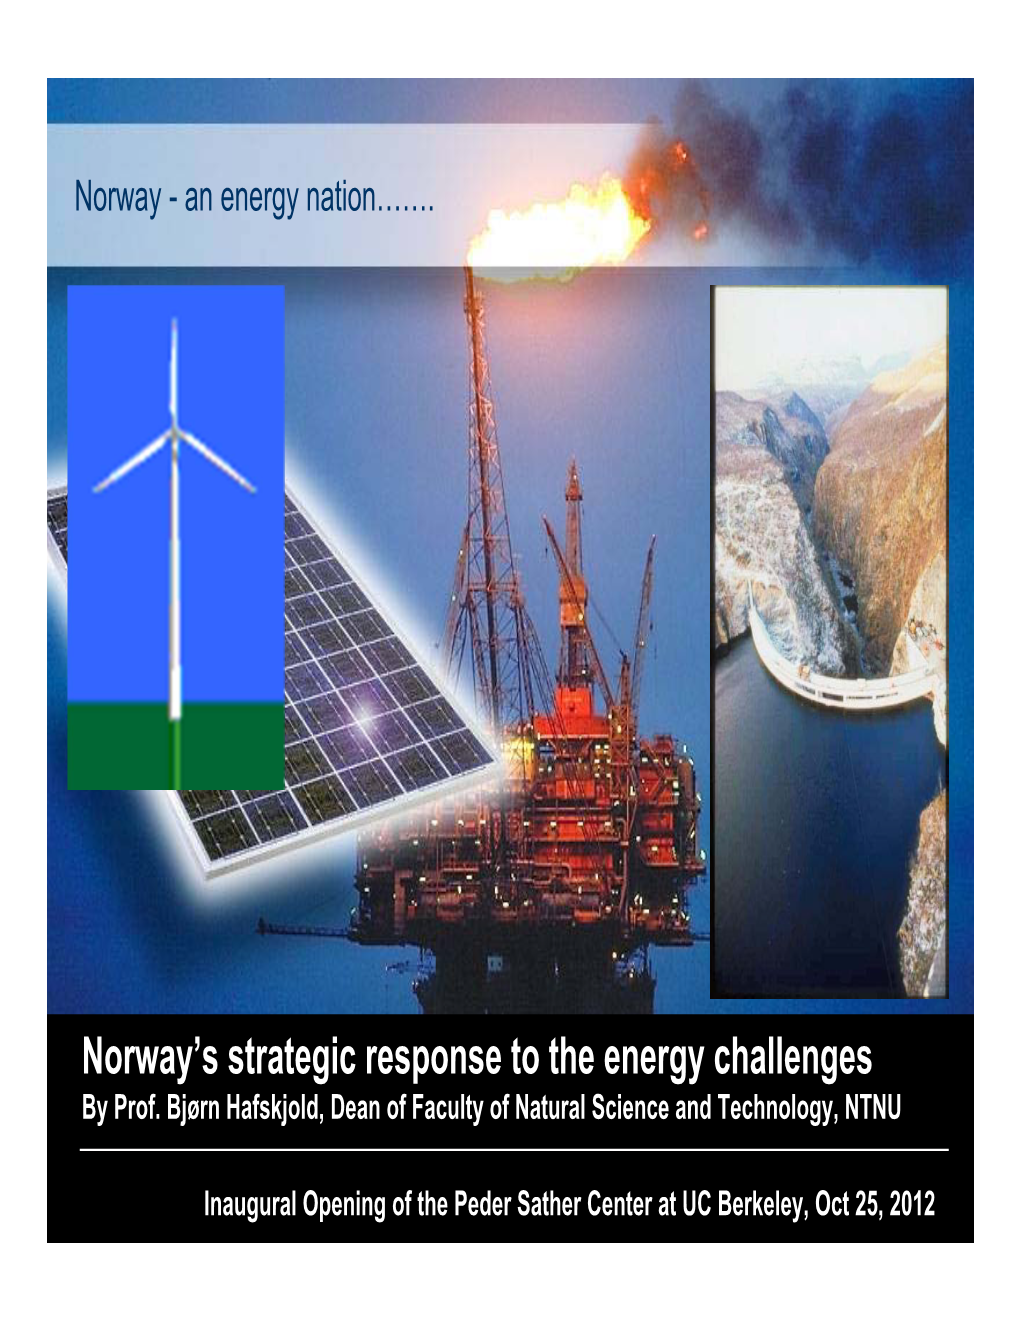 Norway's Strategic Response to the Energy Challenges